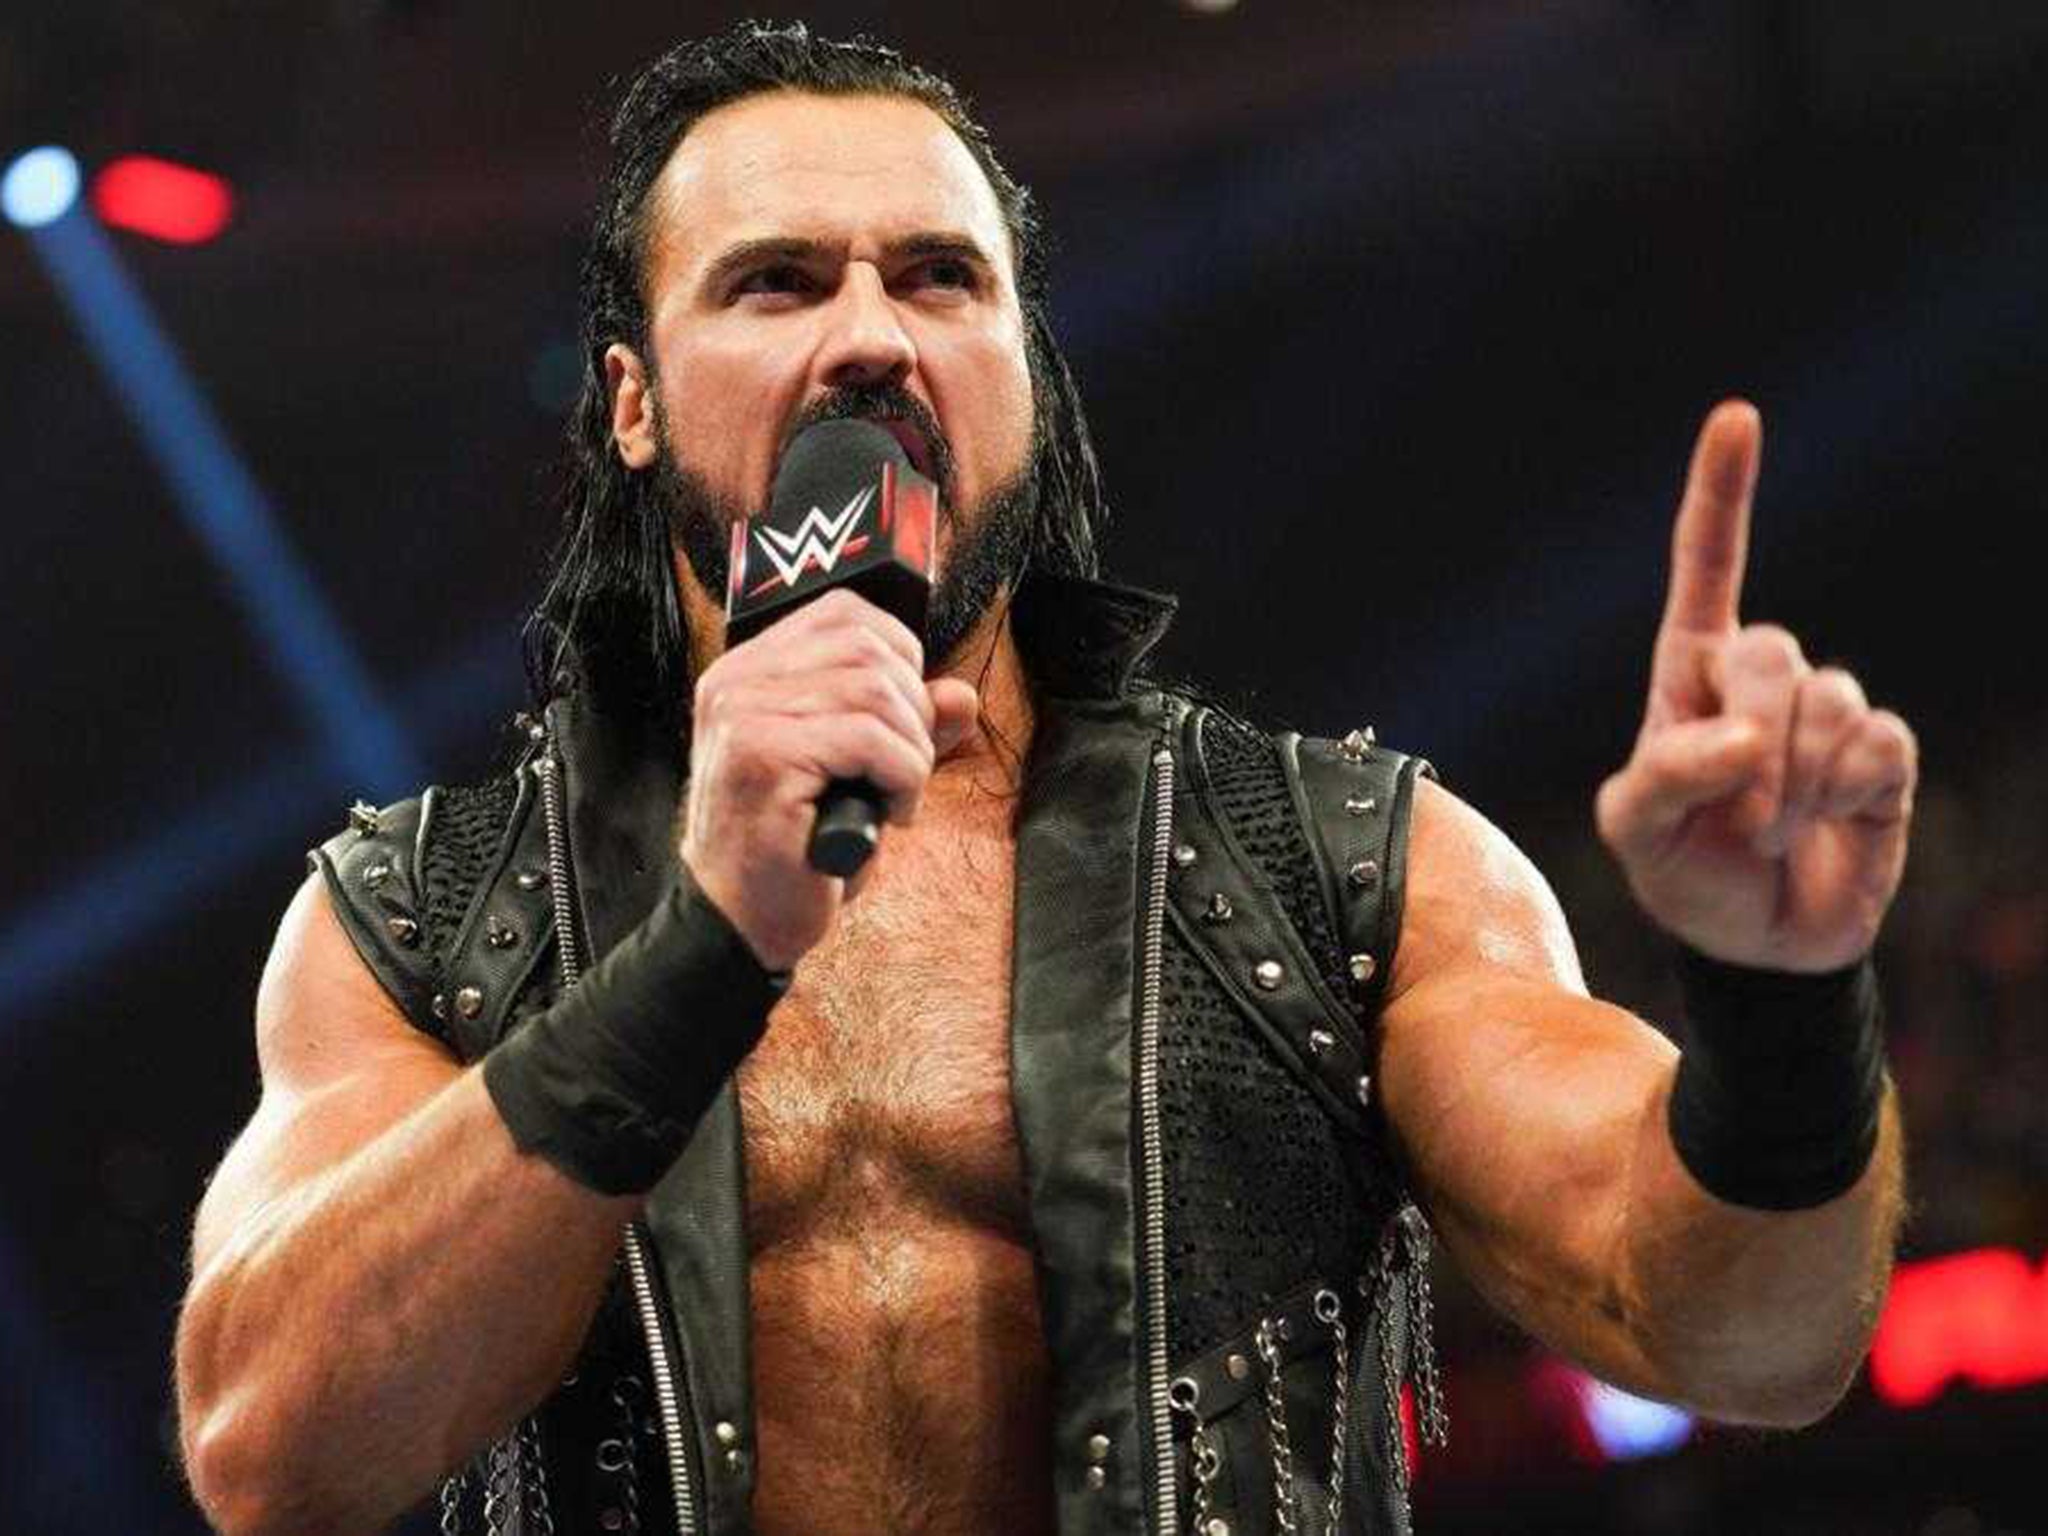 McIntyre is arguably the WWE’s biggest British name currently in the business